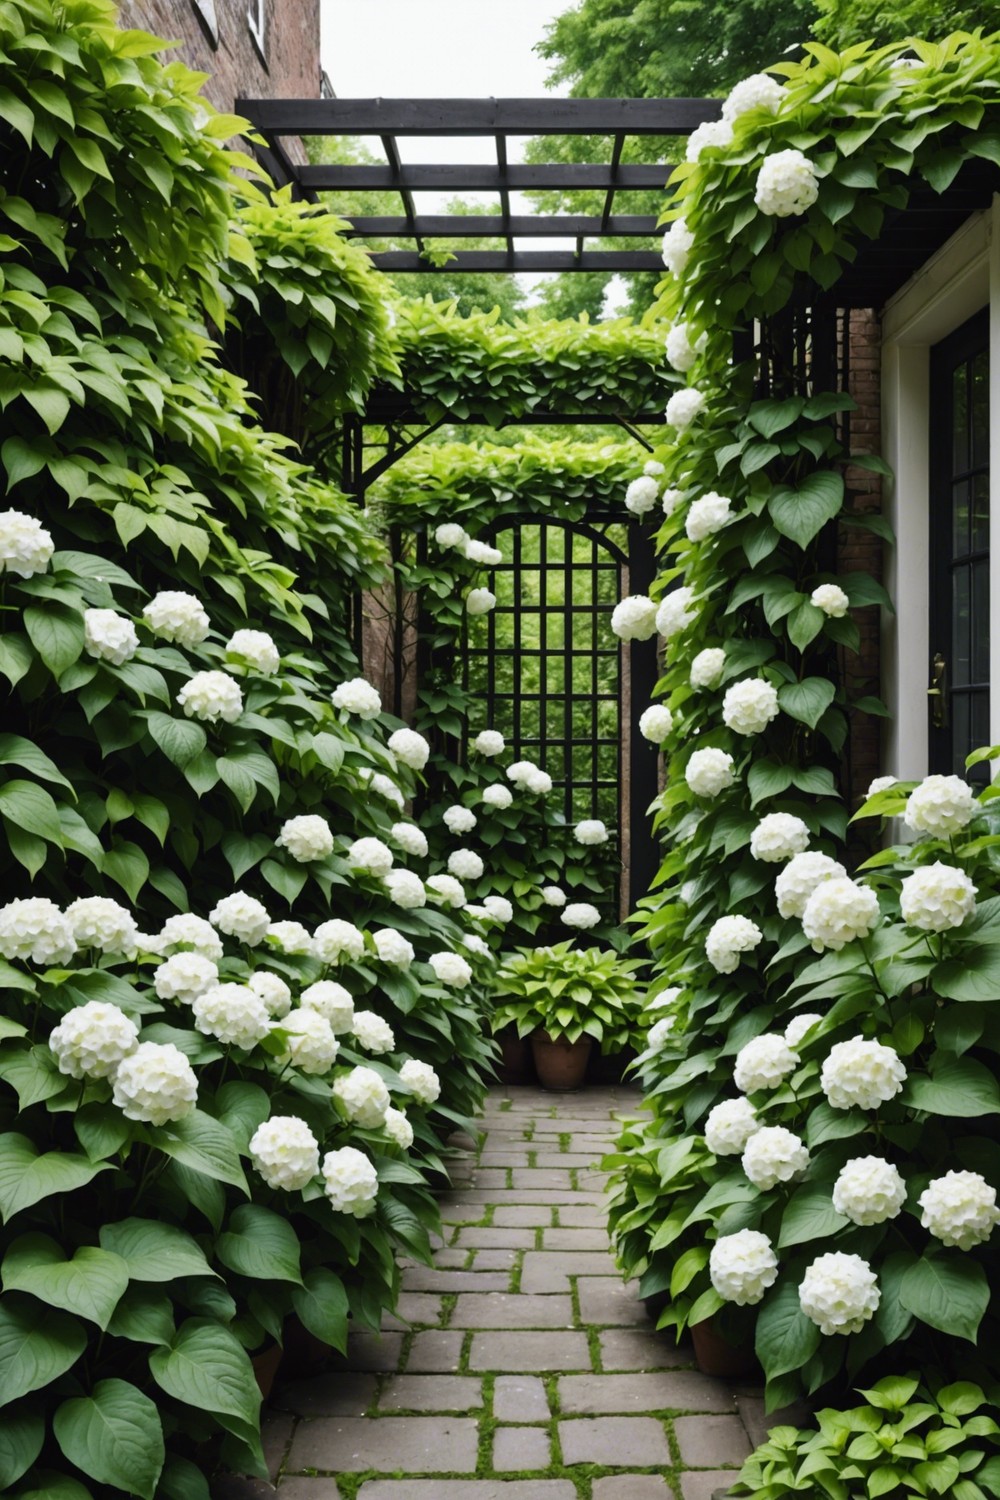 Urban Jungle with Climbing Hydrangeas and Hostas with White Blooms